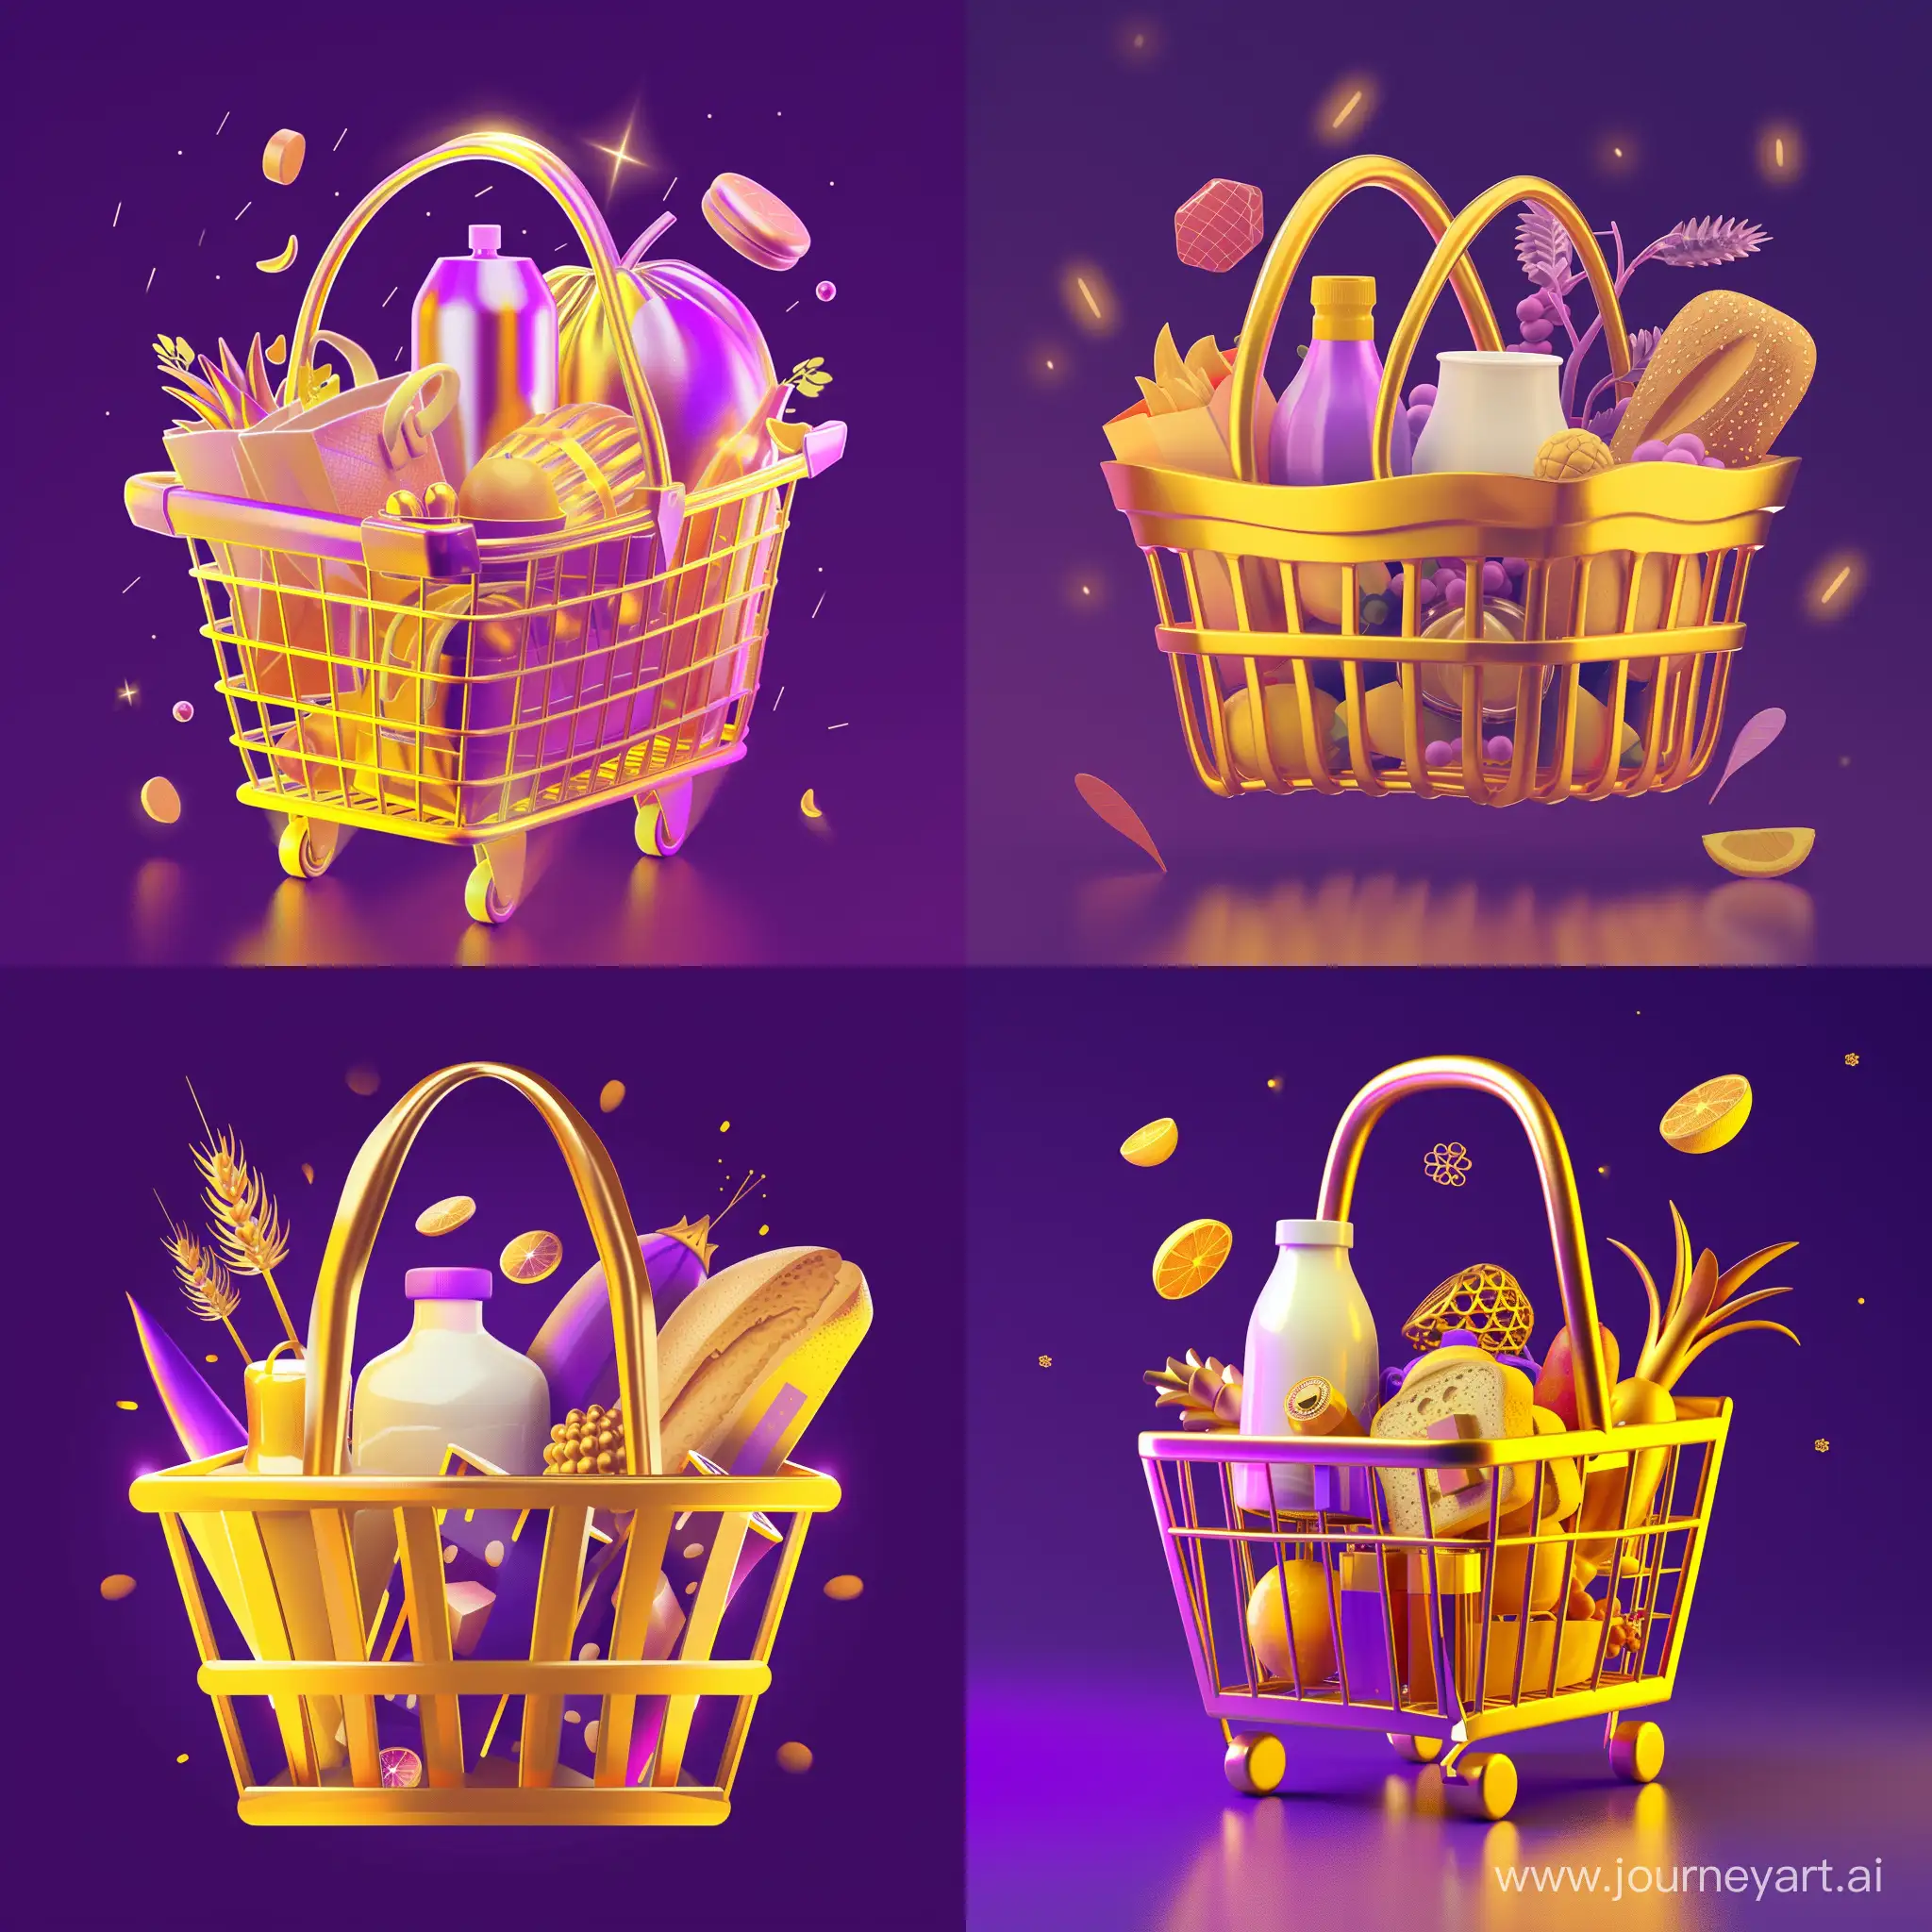 Vibrant-Purple-and-Yellow-Shopping-Basket-Banner-with-Golden-Elegance